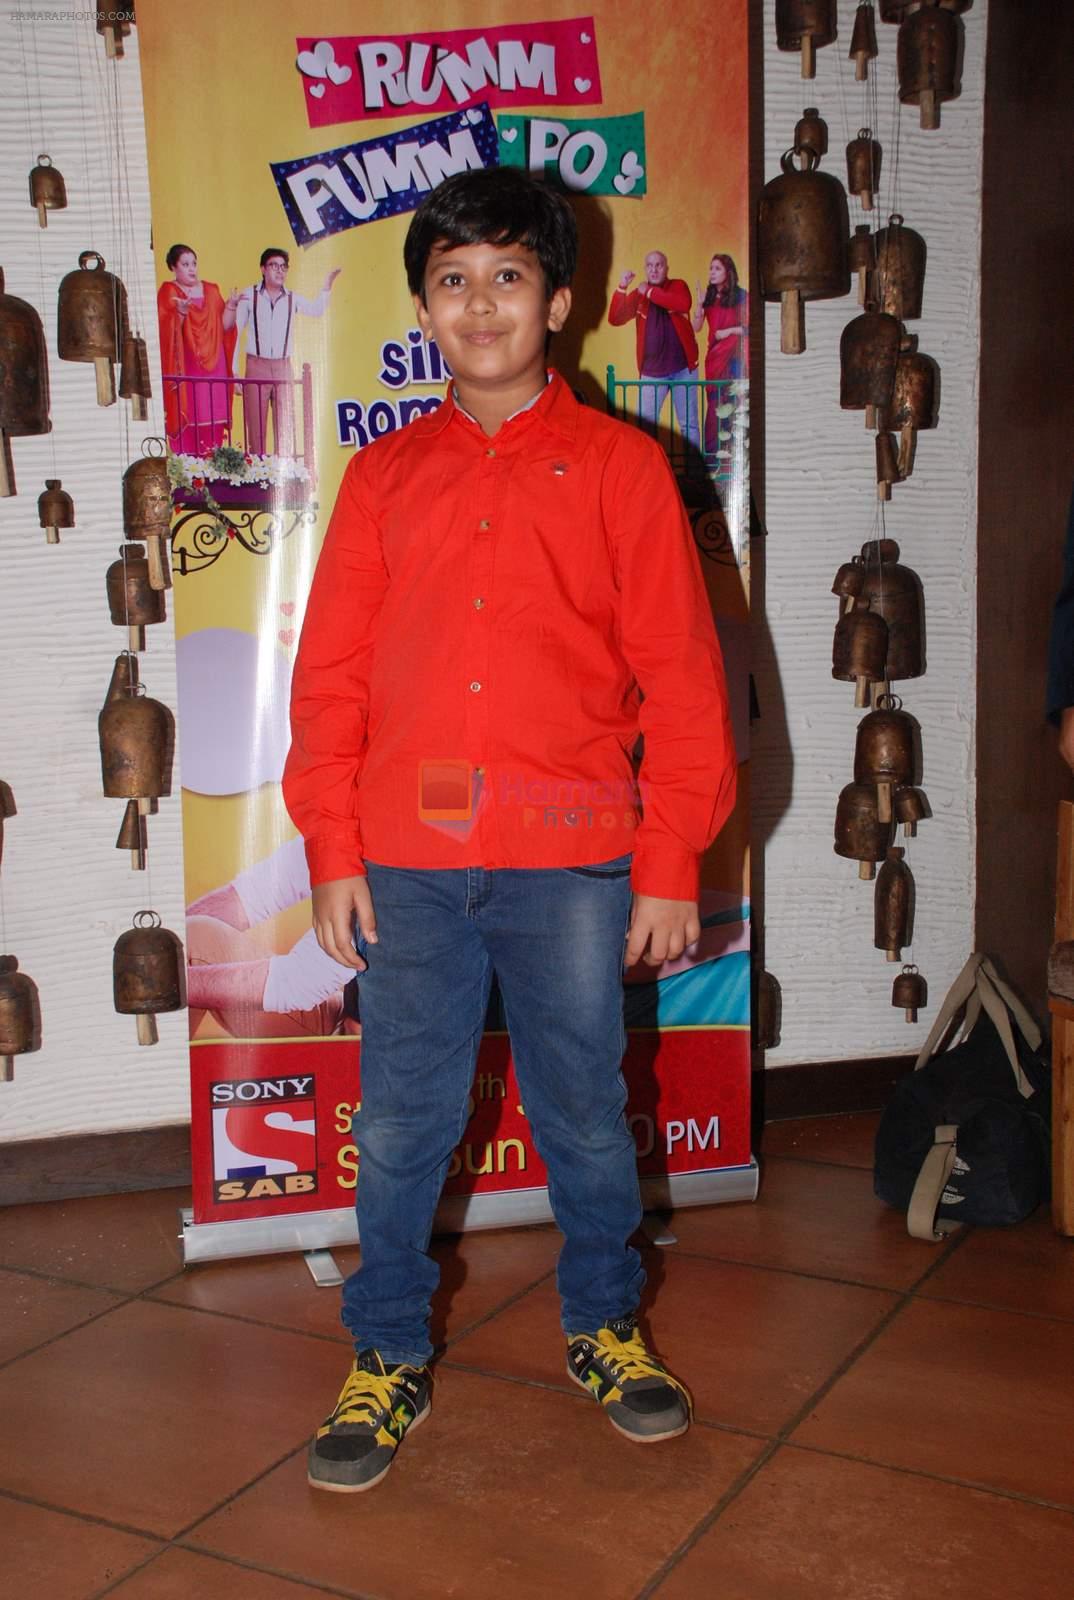 at the Launch of SAB Tv's new serial Rumm Pumm po in Fun Republic on 5th June 2015